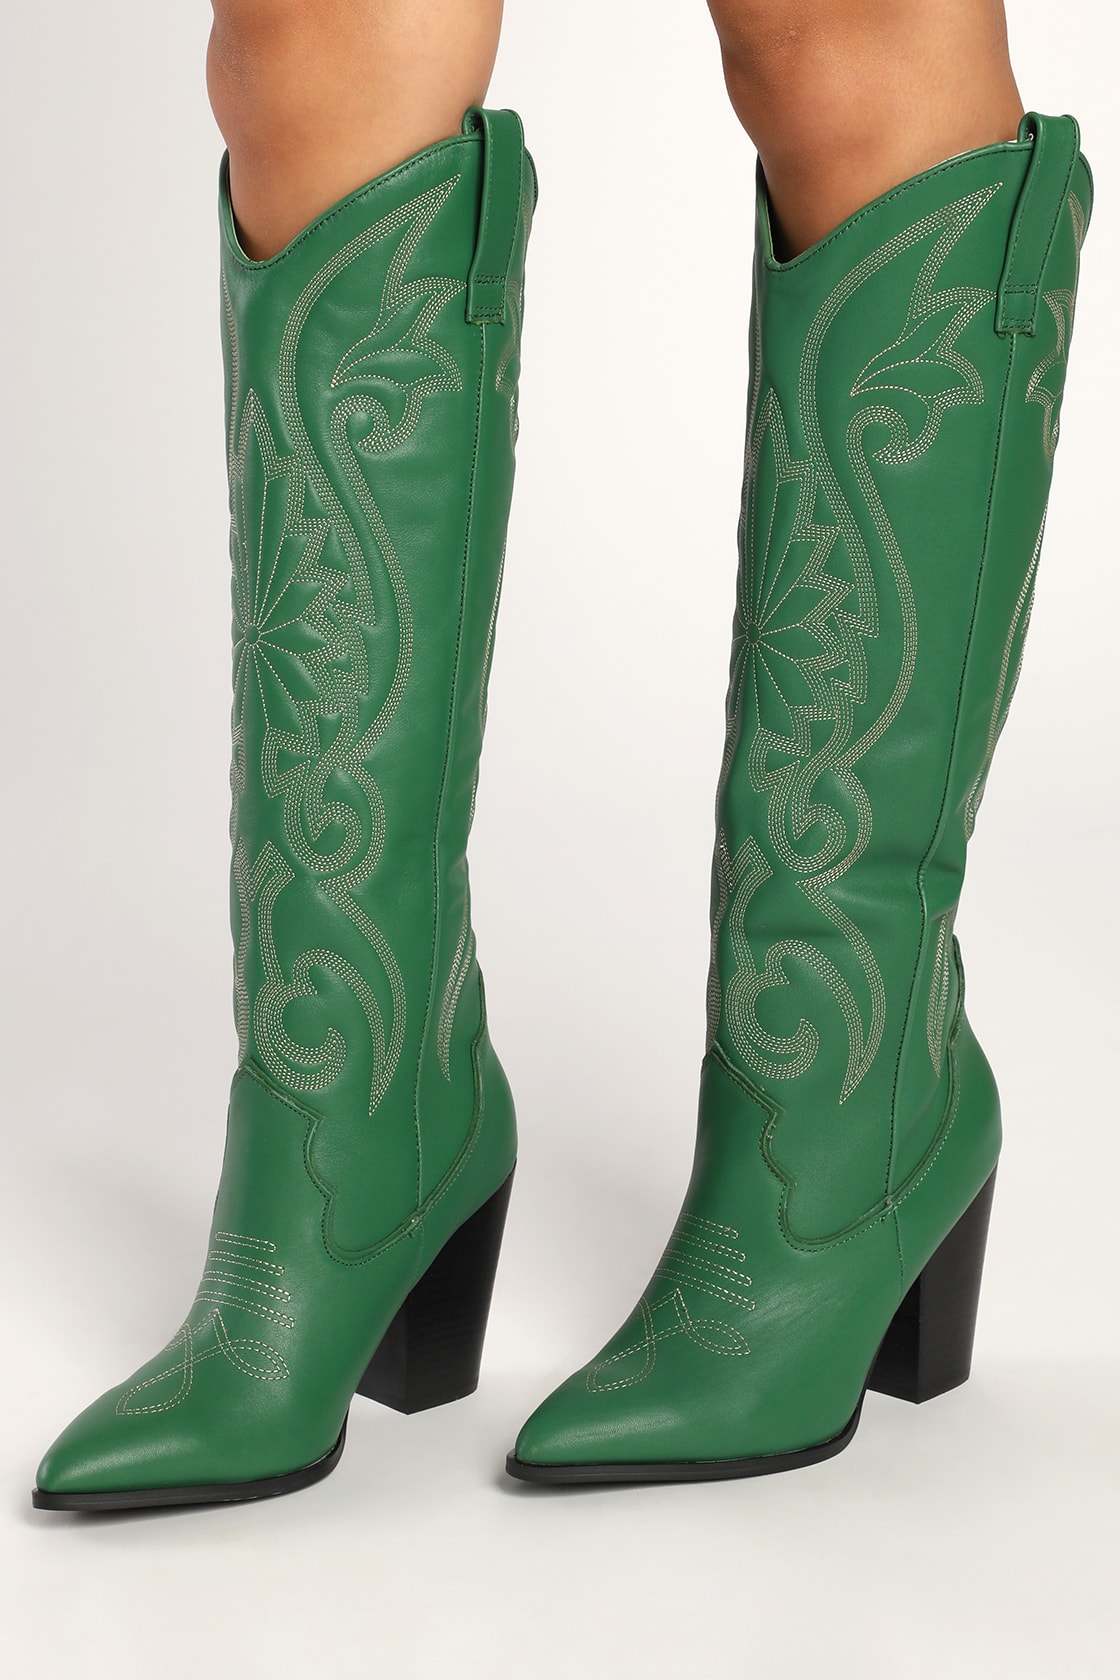 Steve Madden Lasso Green Boots - Leather Cowboy Boots - Lulus